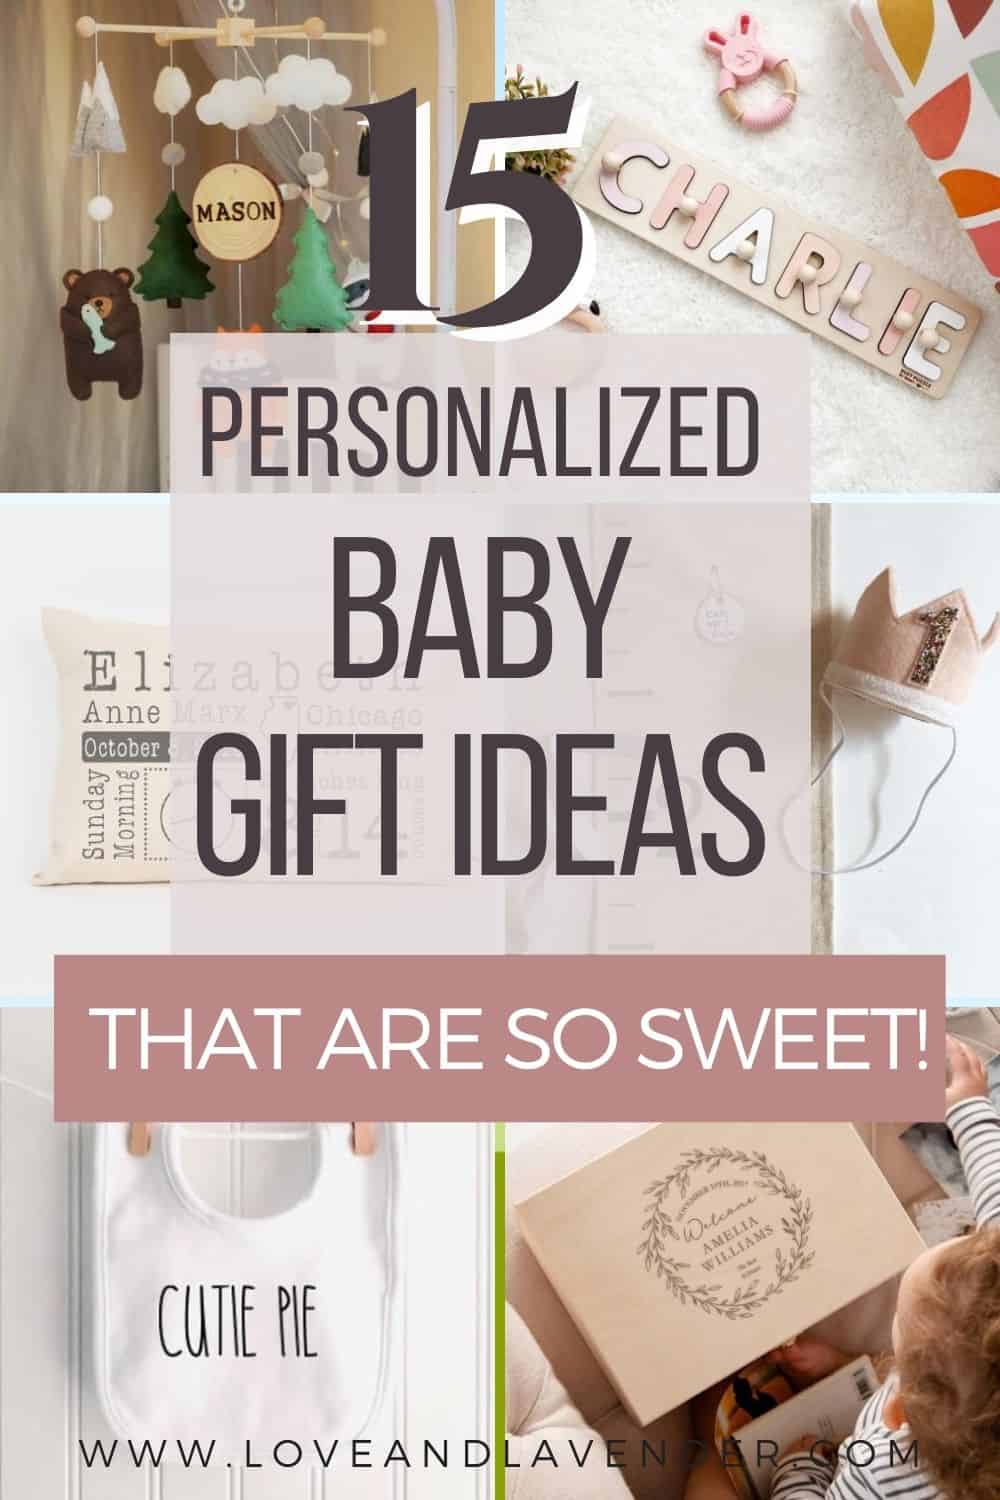 16 Personalized Baby Gift Ideas that are So Sweet!